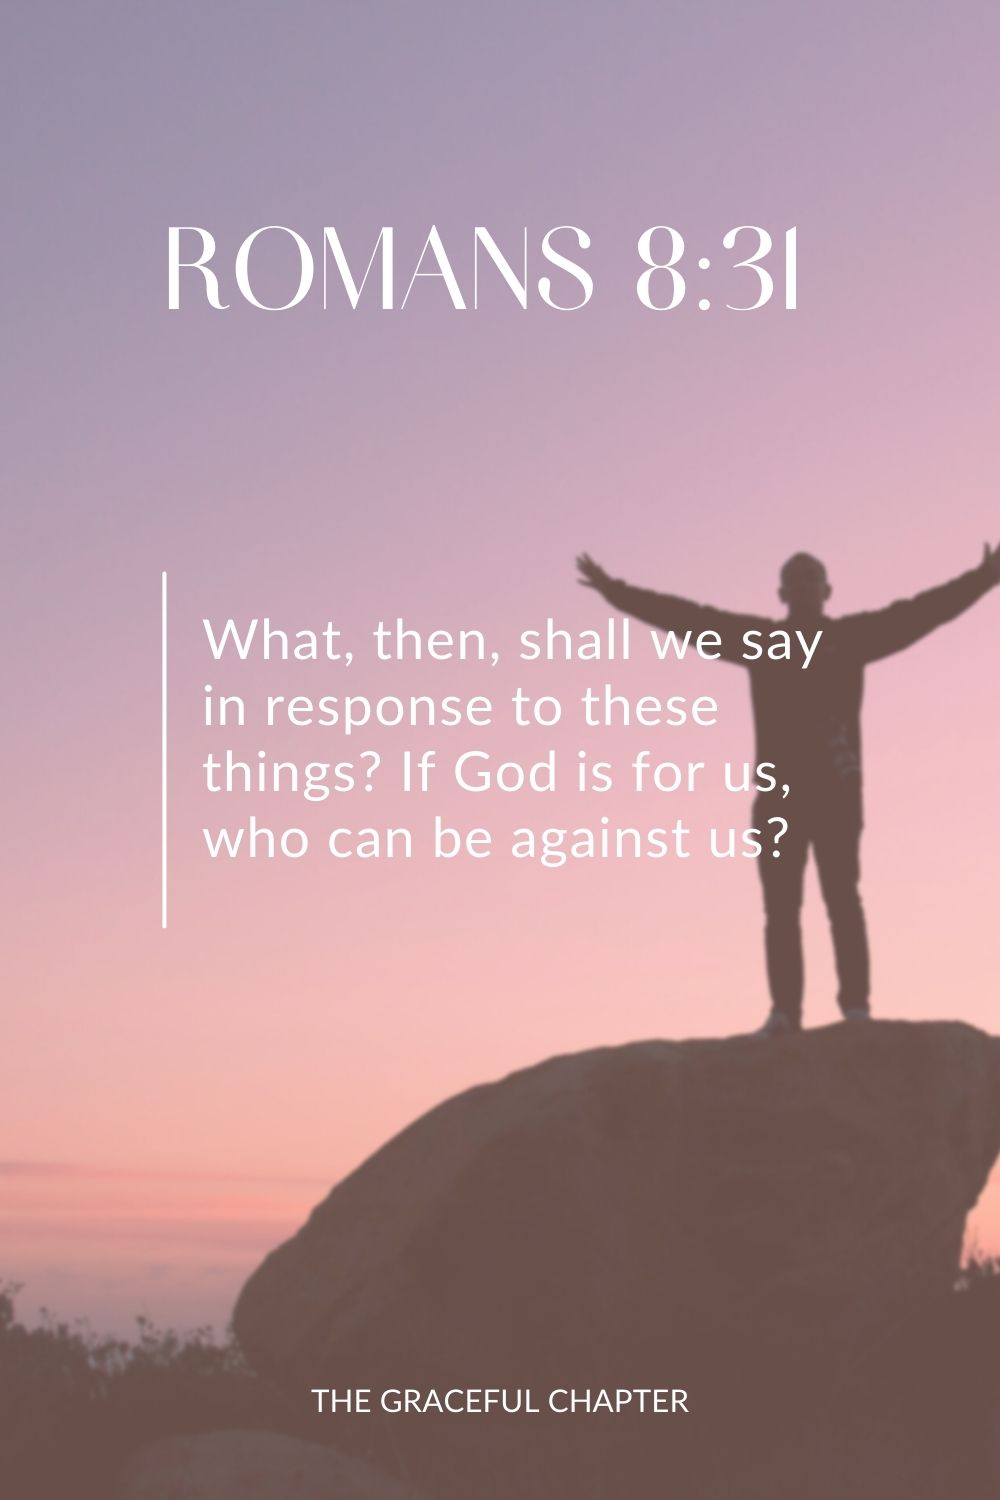 What, then, shall we say in response to these things? If God is for us, who can be against us? Romans 8:31